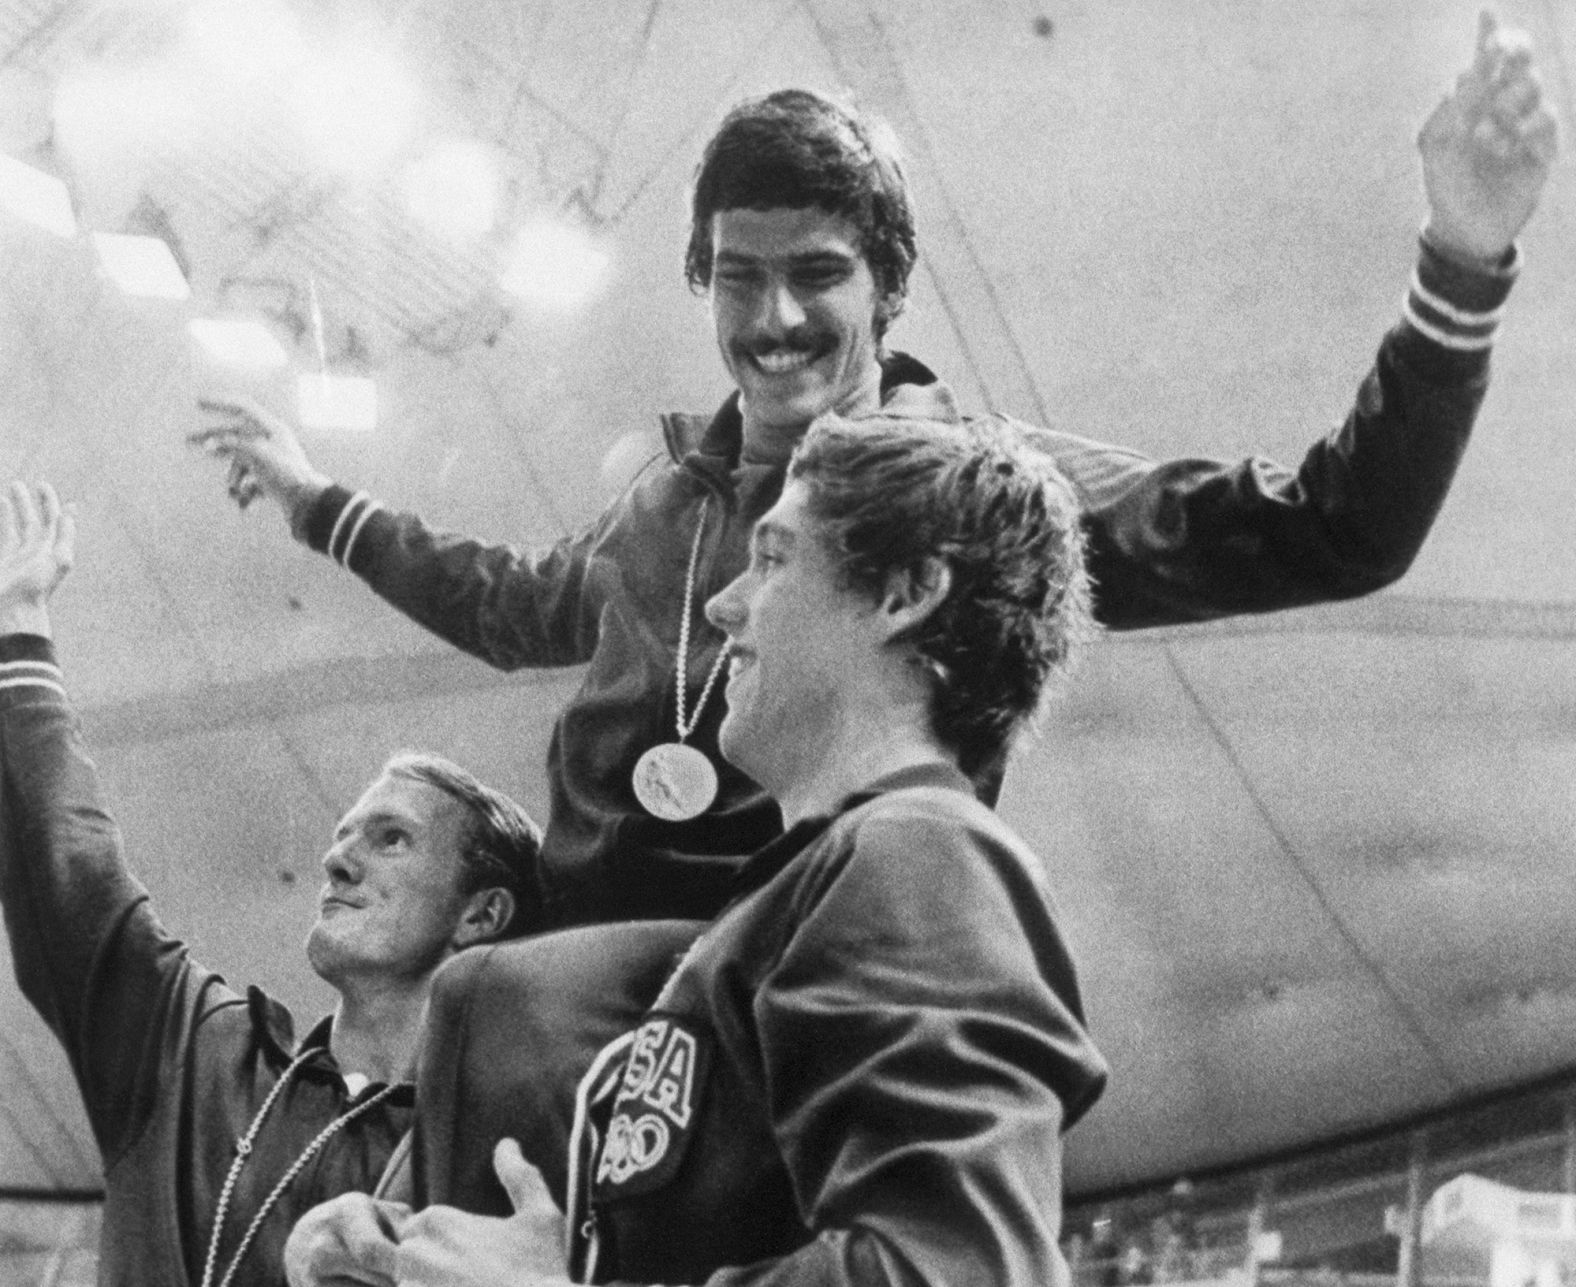 Before Michael Phelps, there was Mark Spitz. Spitz, seen here on the shoulders of American teammates Tom Bruce and Mike Stamm, won seven swimming events at the 1972 Summer Games in Munich, Germany. It was the most golds won at one Olympics until Phelps won eight in 2008.